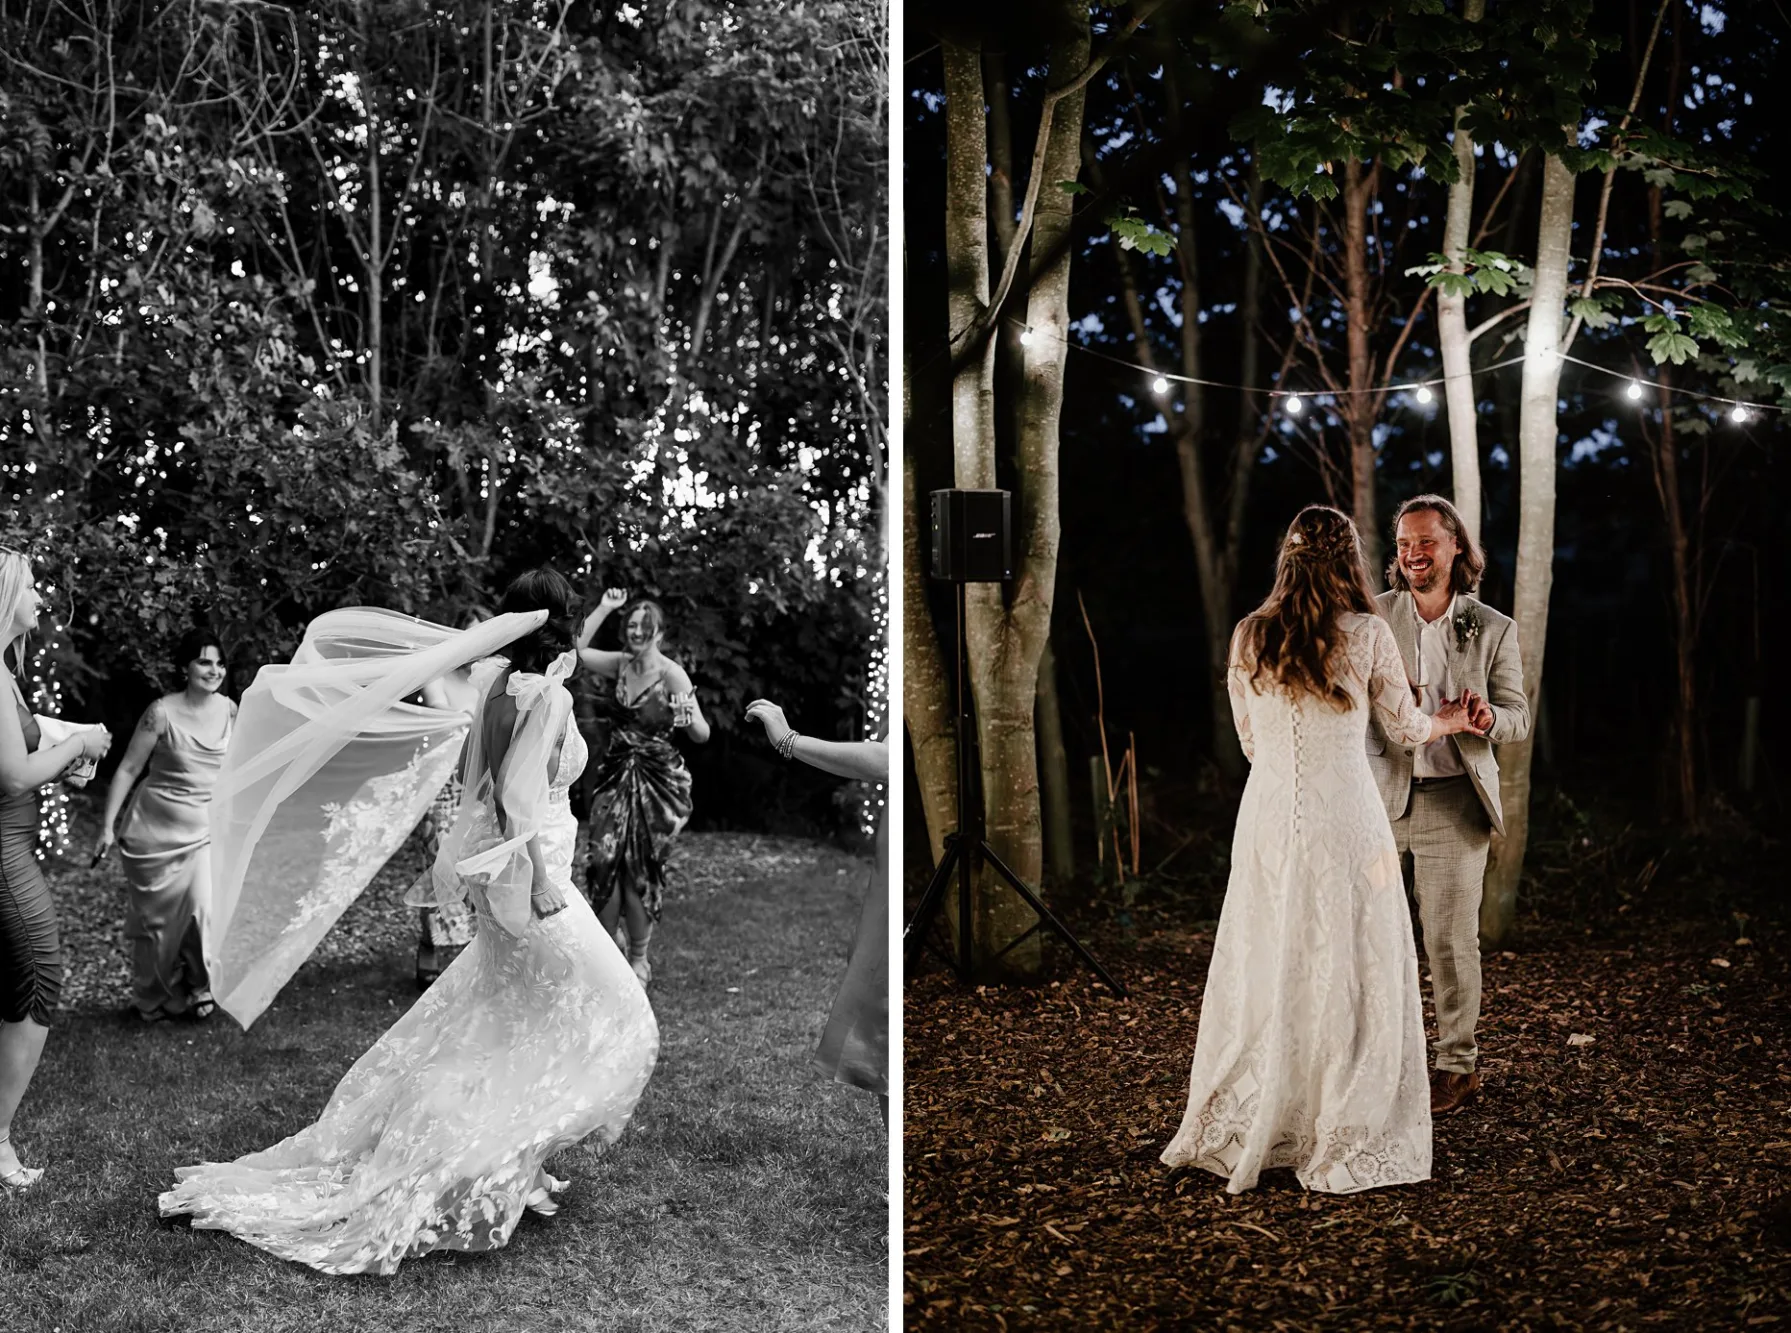 The first photograph shows a bride dancing on her own in the woods, surrounded by her girlfriends. Her veil is blowing in the wind. The second photograph shows a bride and groom dancing in the woodland dancefloor at oaklands.